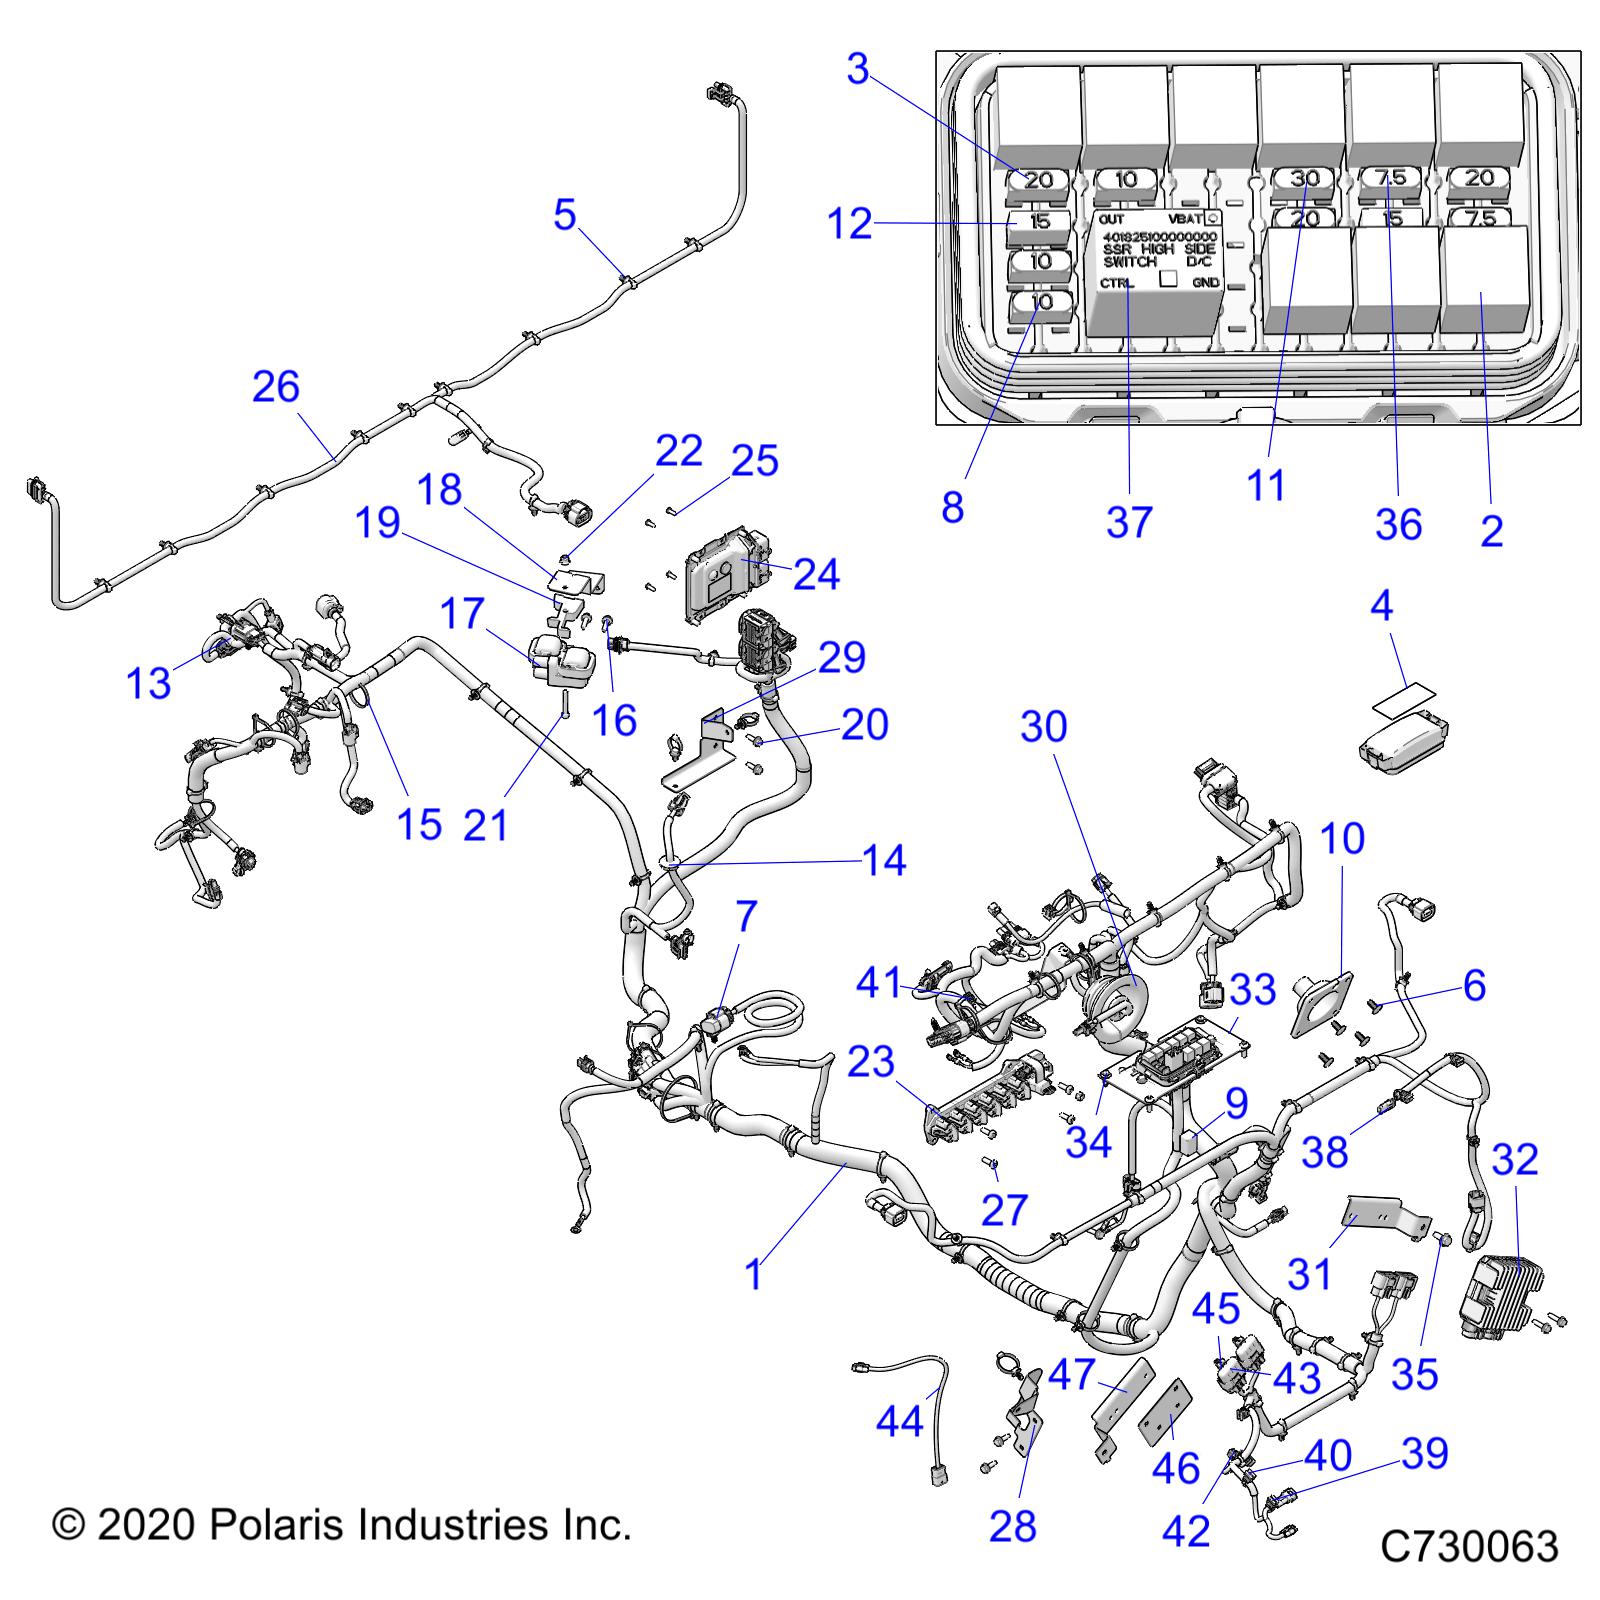 Part Number : 2415394 HARN-CHASSIS BC